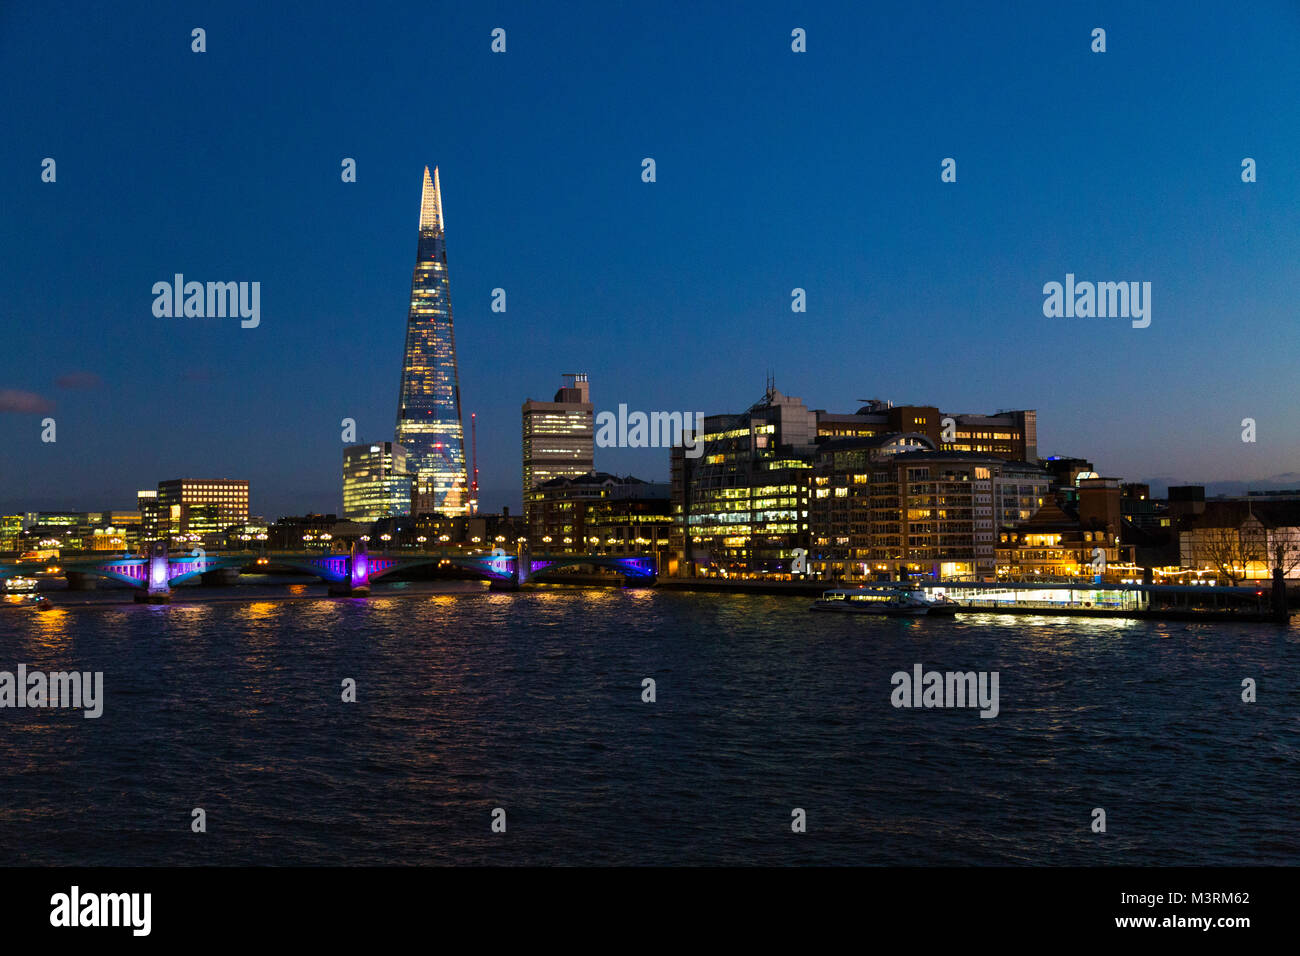 London skyline with view of The Shard and Southwark Bridge and the Thames River at night, London, UK Stock Photo